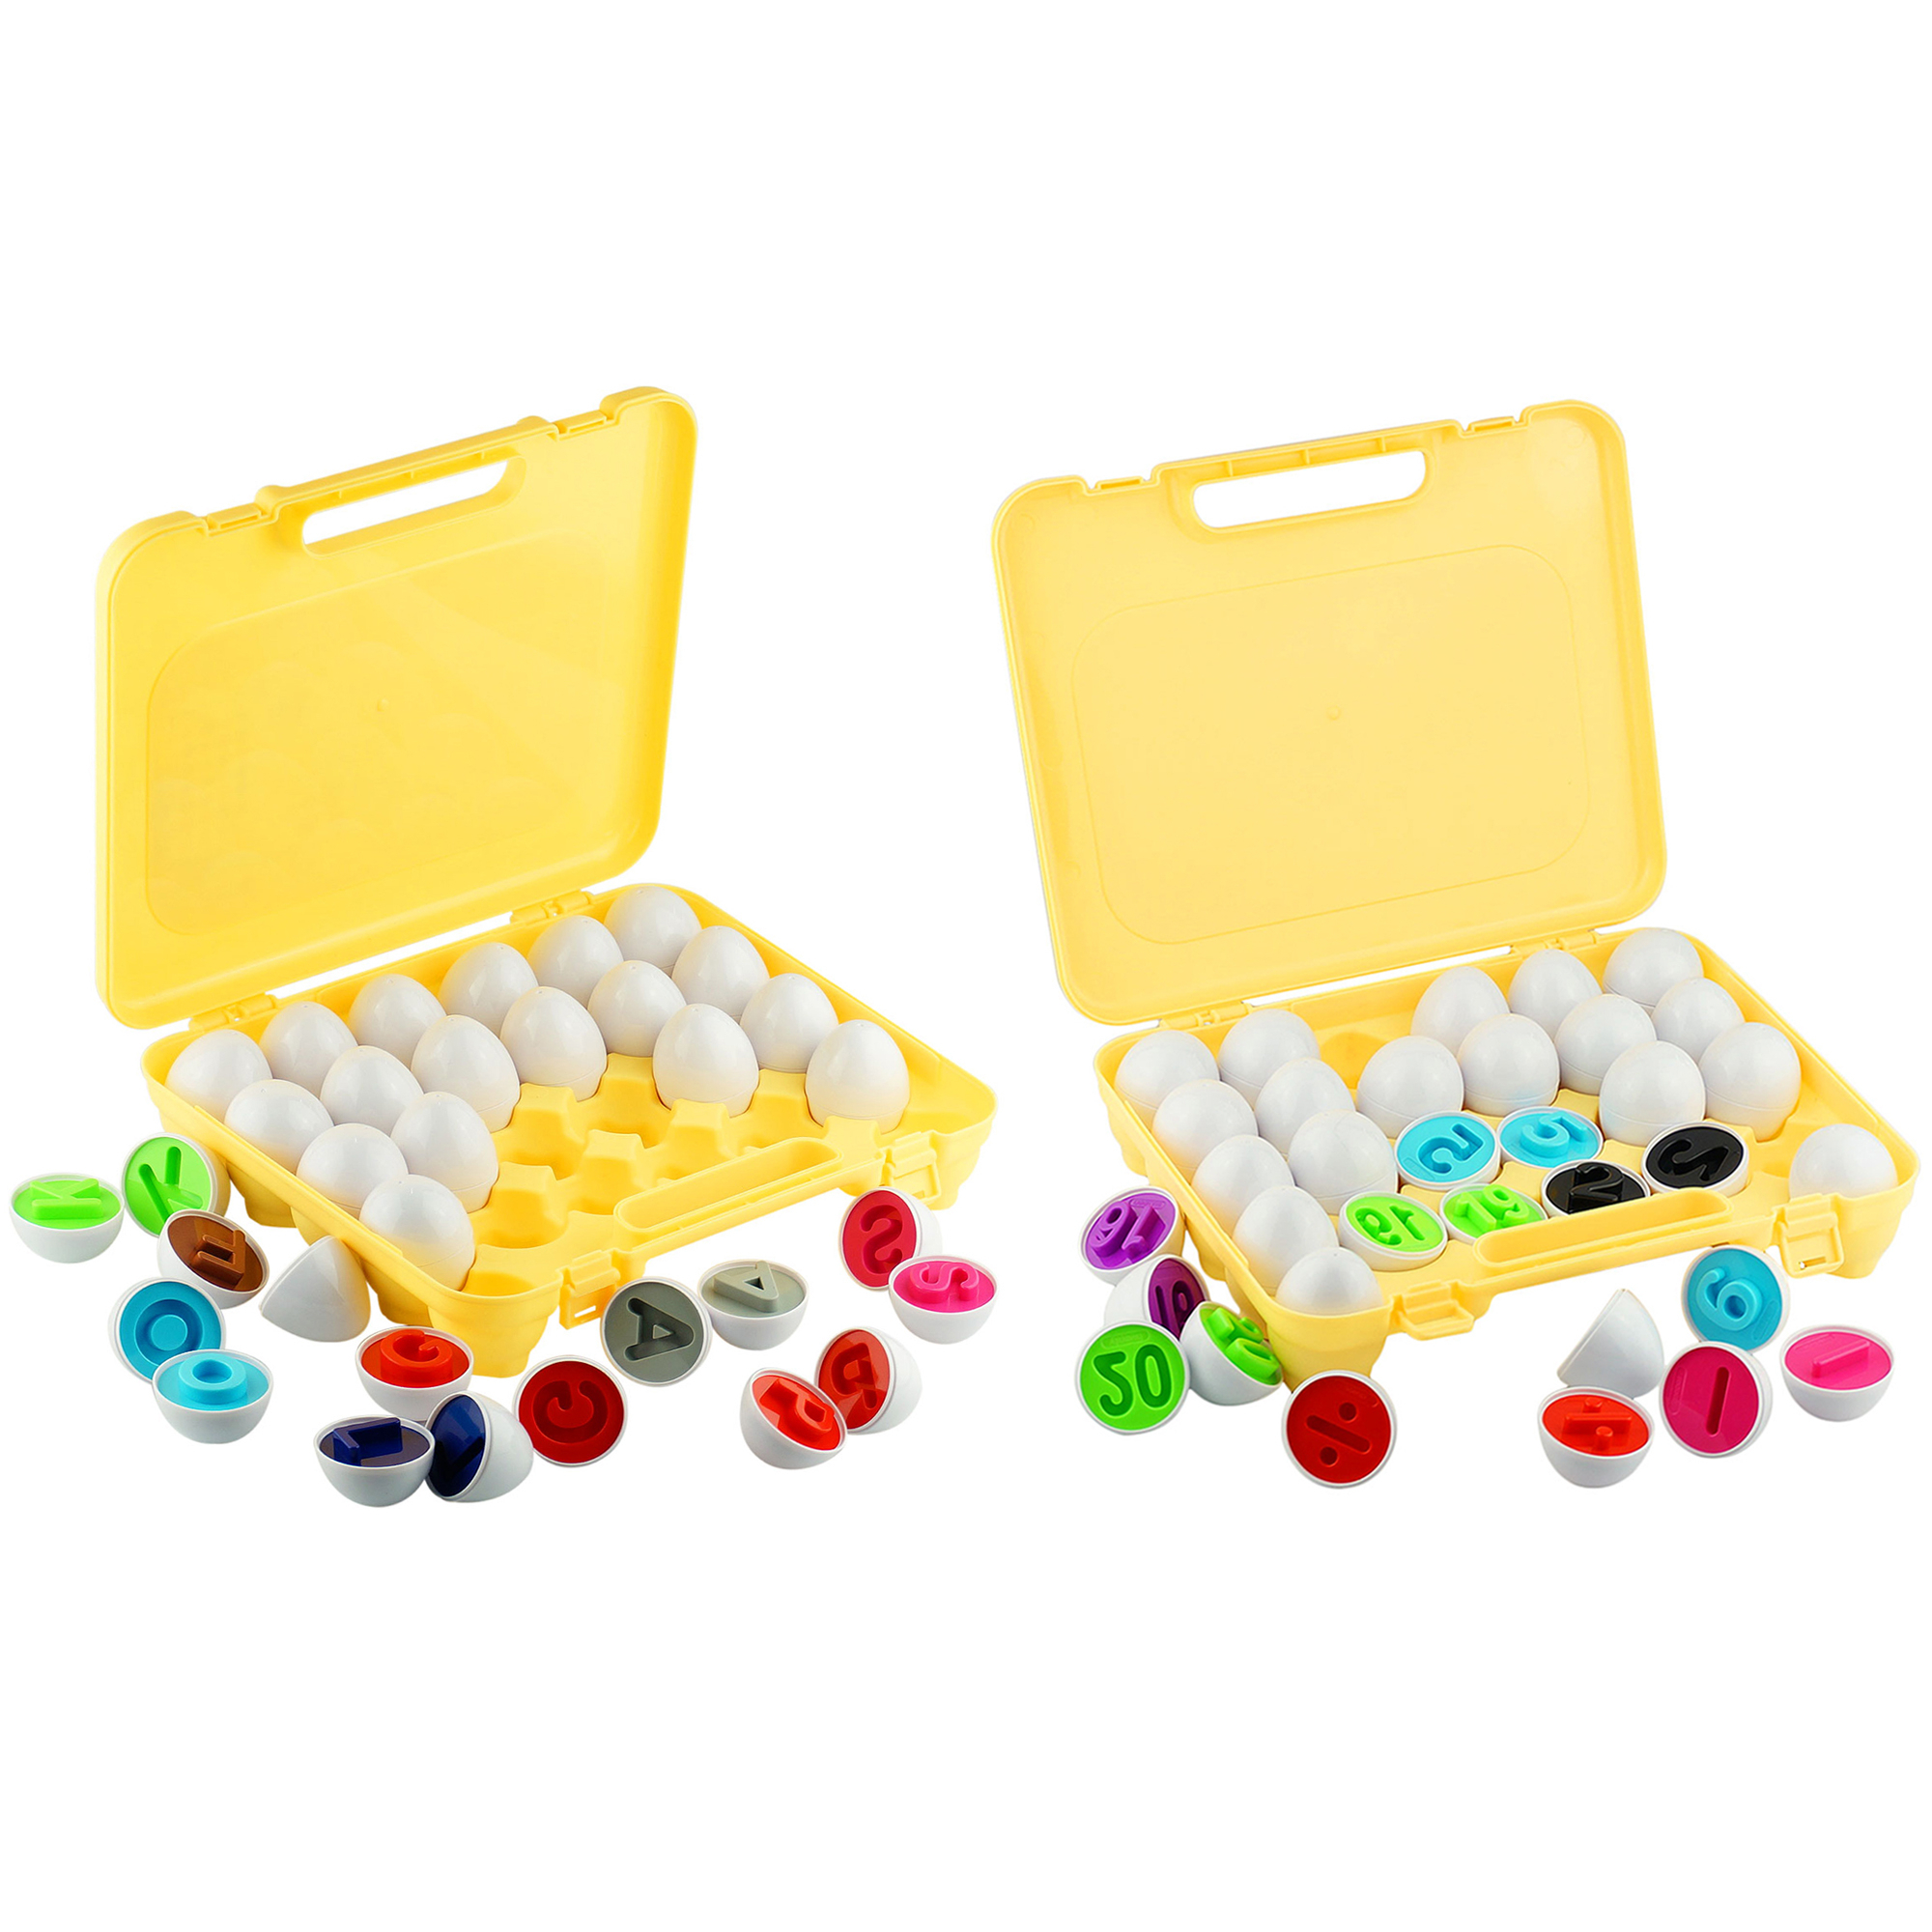 Set Of 2 Dimple Fun Egg Matching Toy Toddler Easter Toys Includes Numbers W/ Arithmetic & ABC Letter Recognition Educational Sorting Puzzles